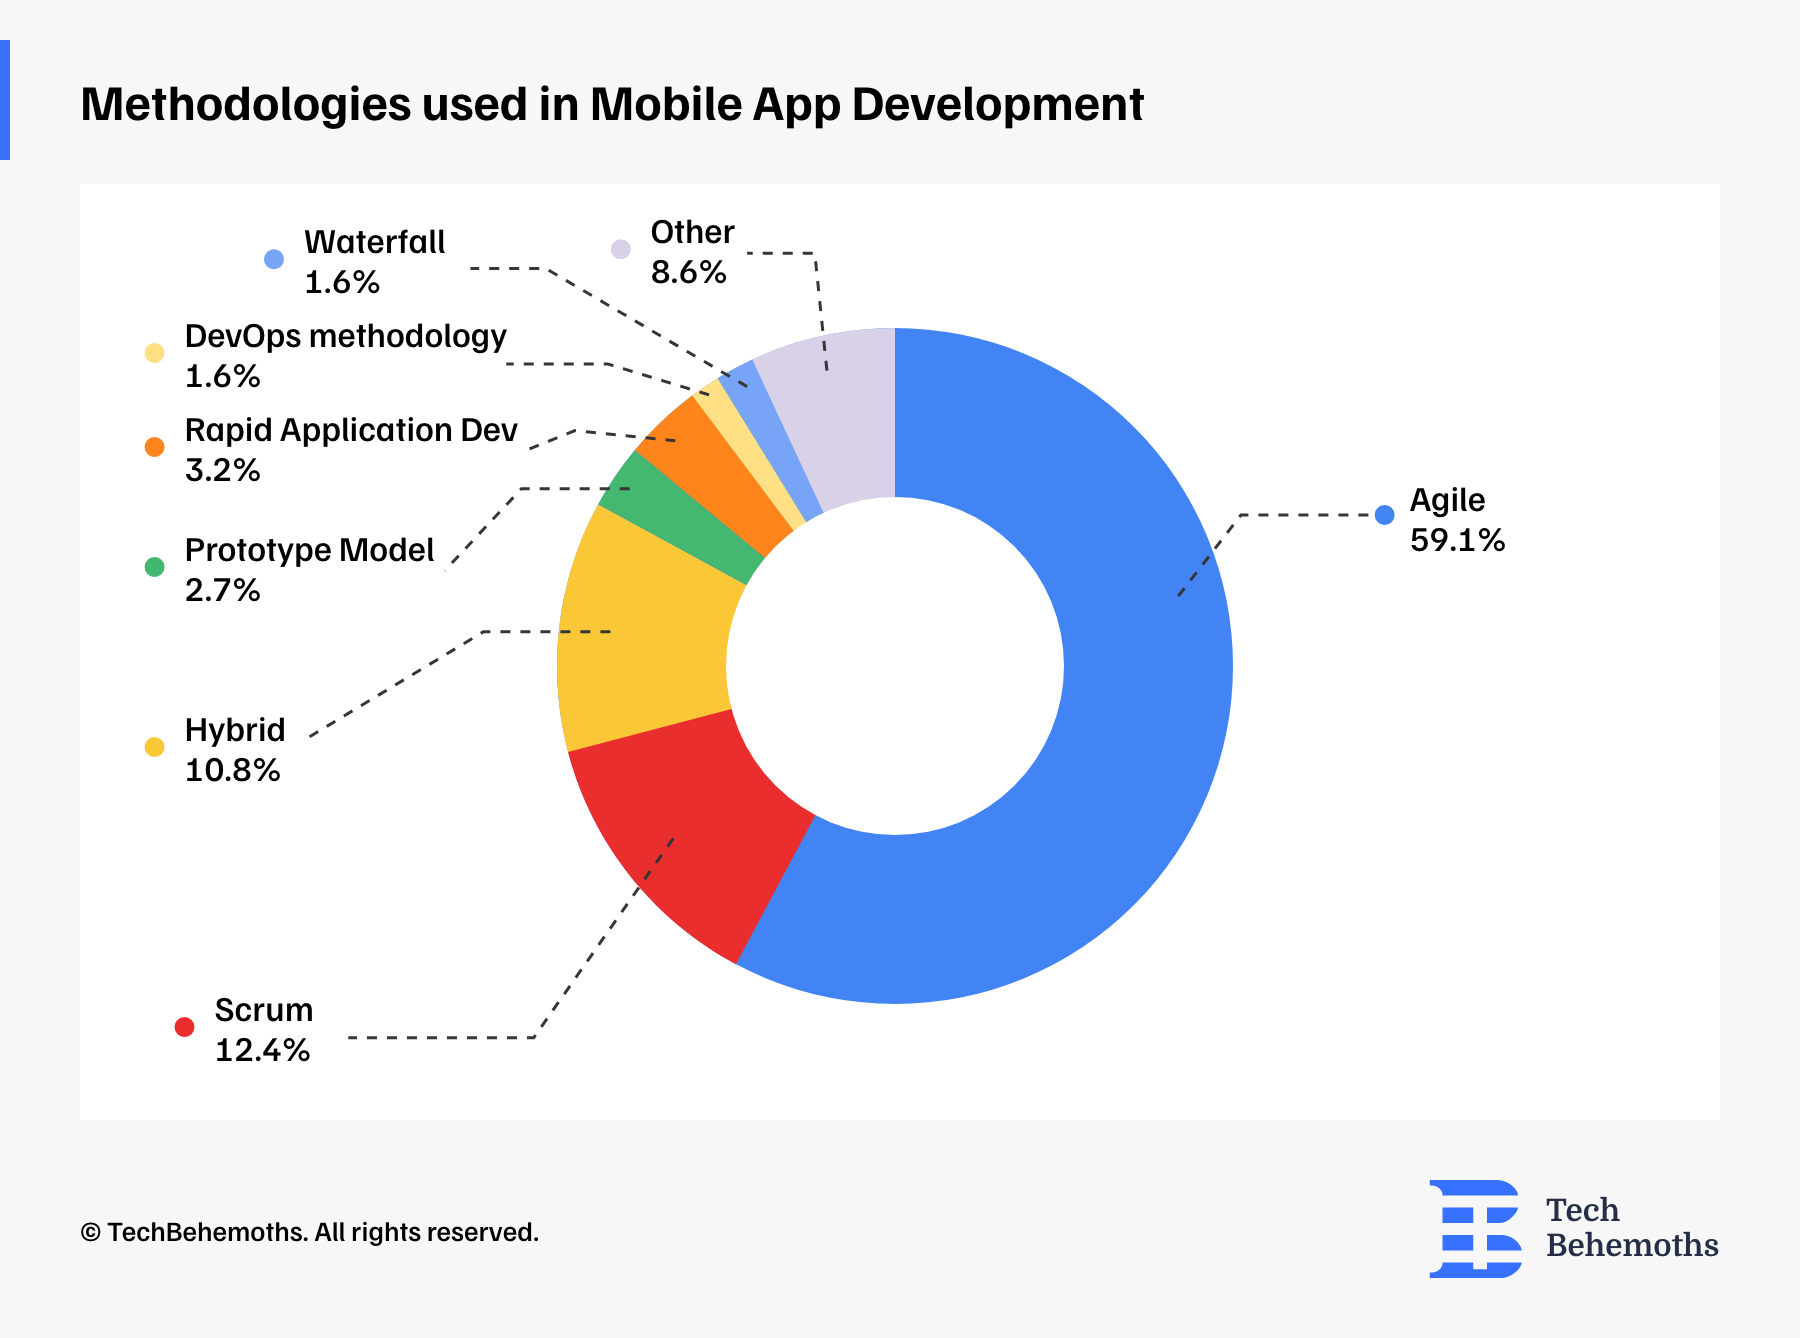 Methodologies used in Mobile app development by specialized companies - survey results